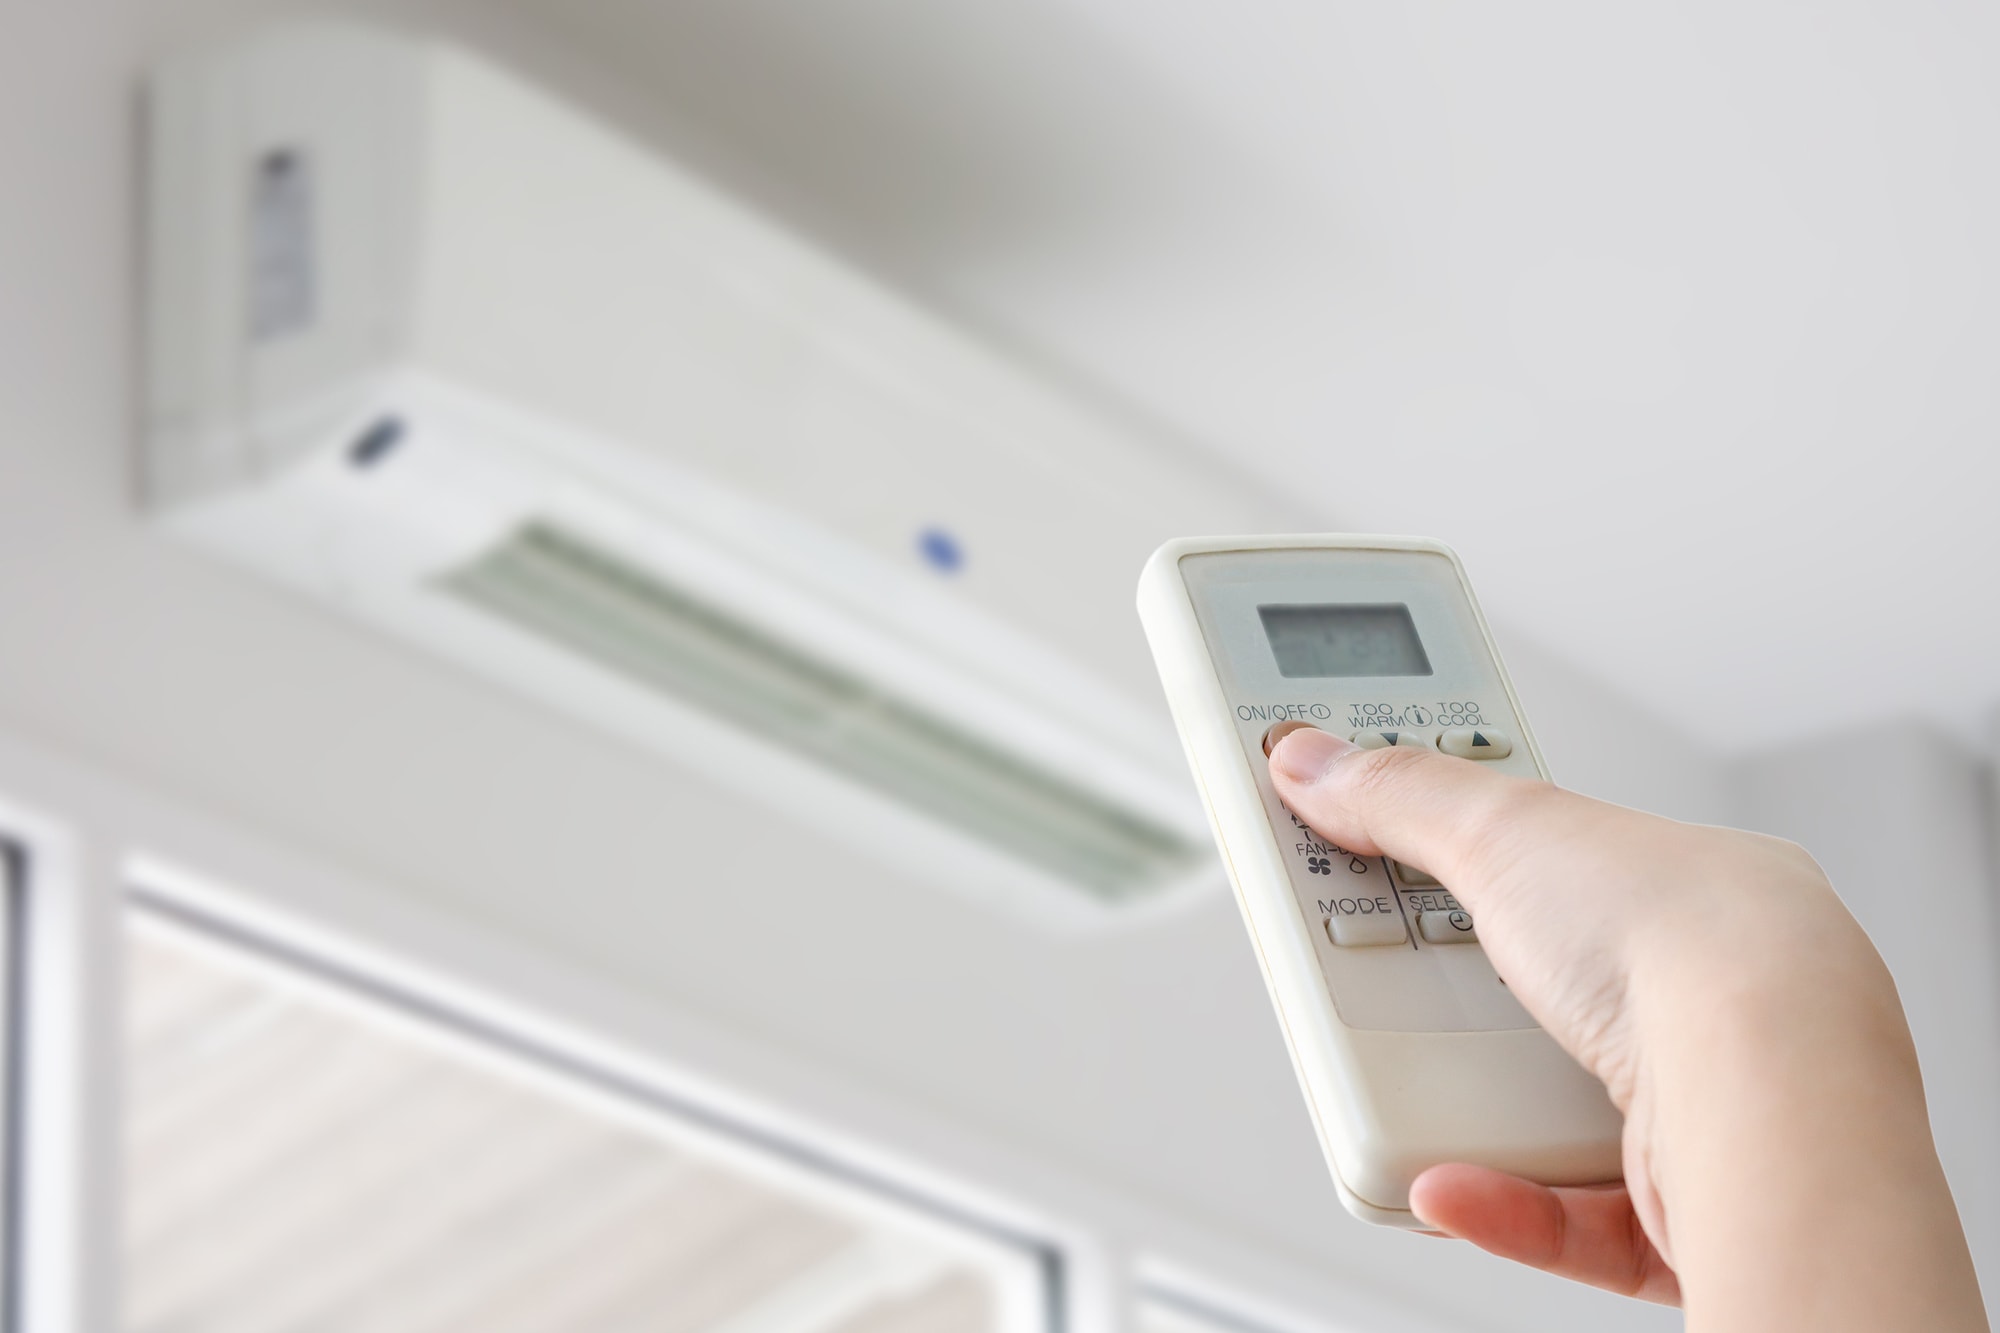 How To Turn On The Ac This Is Why Your AC Keeps Turning On and Off - Sewell Electric Company